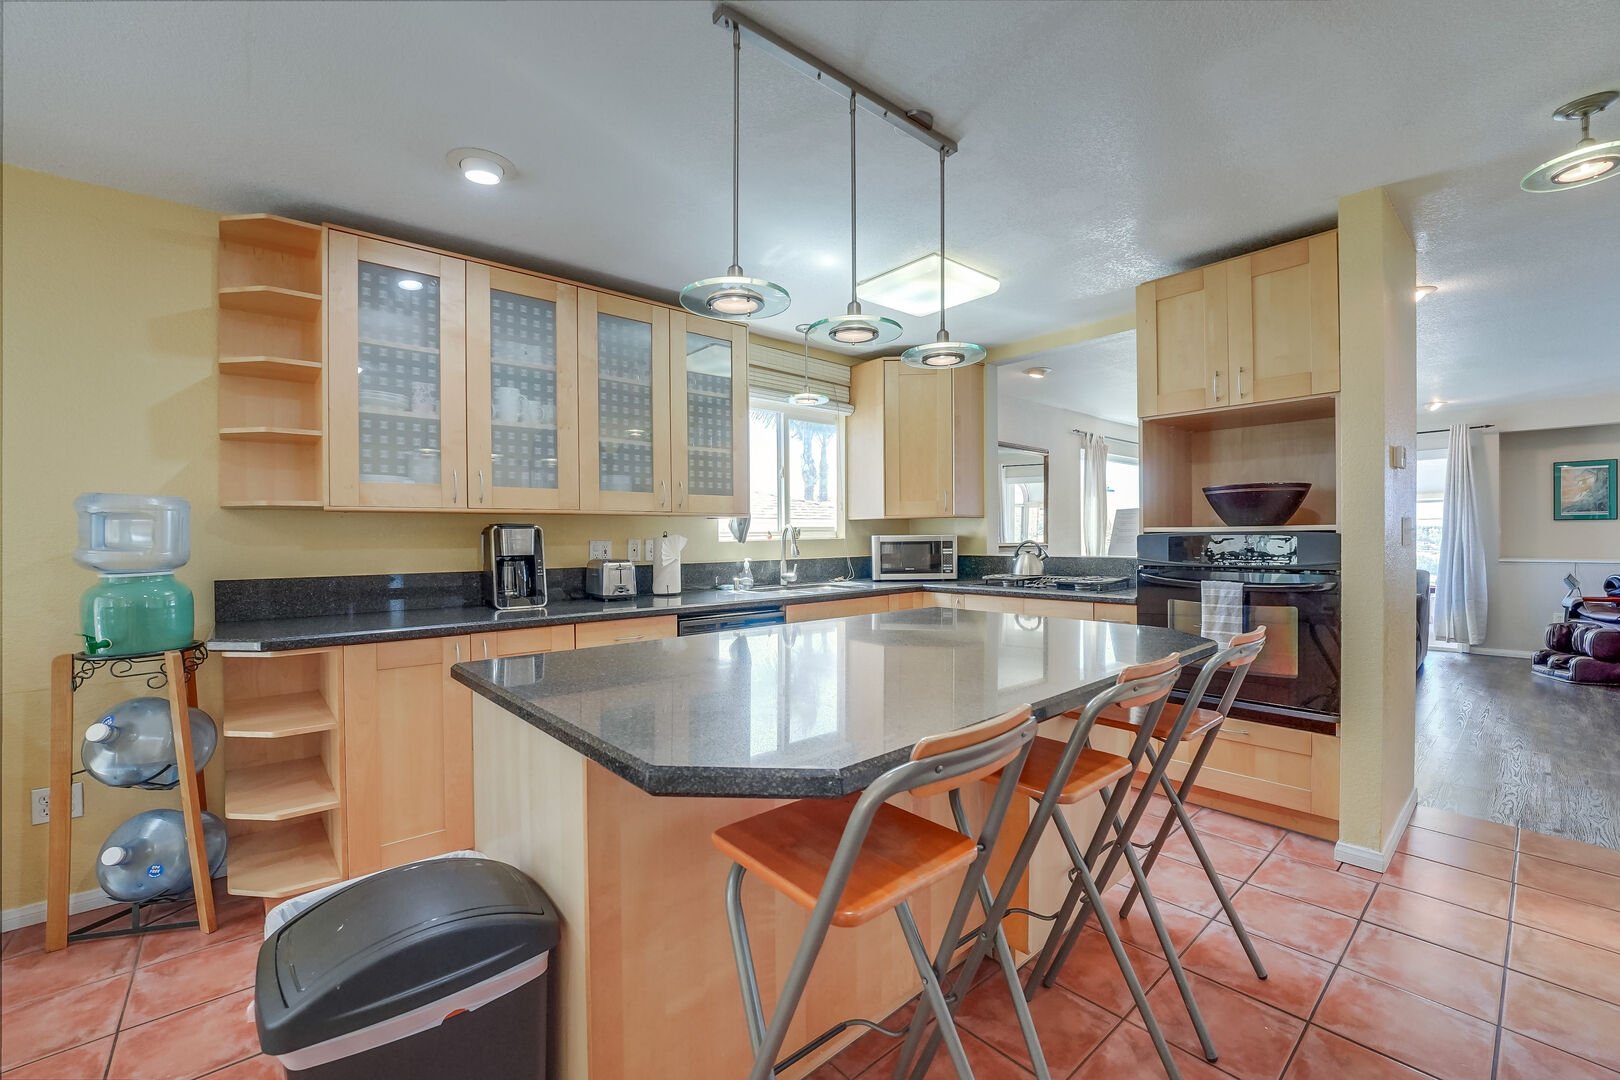 Kitchen fully equipped for meals at home and separate island, breakfast bar with seating for 3